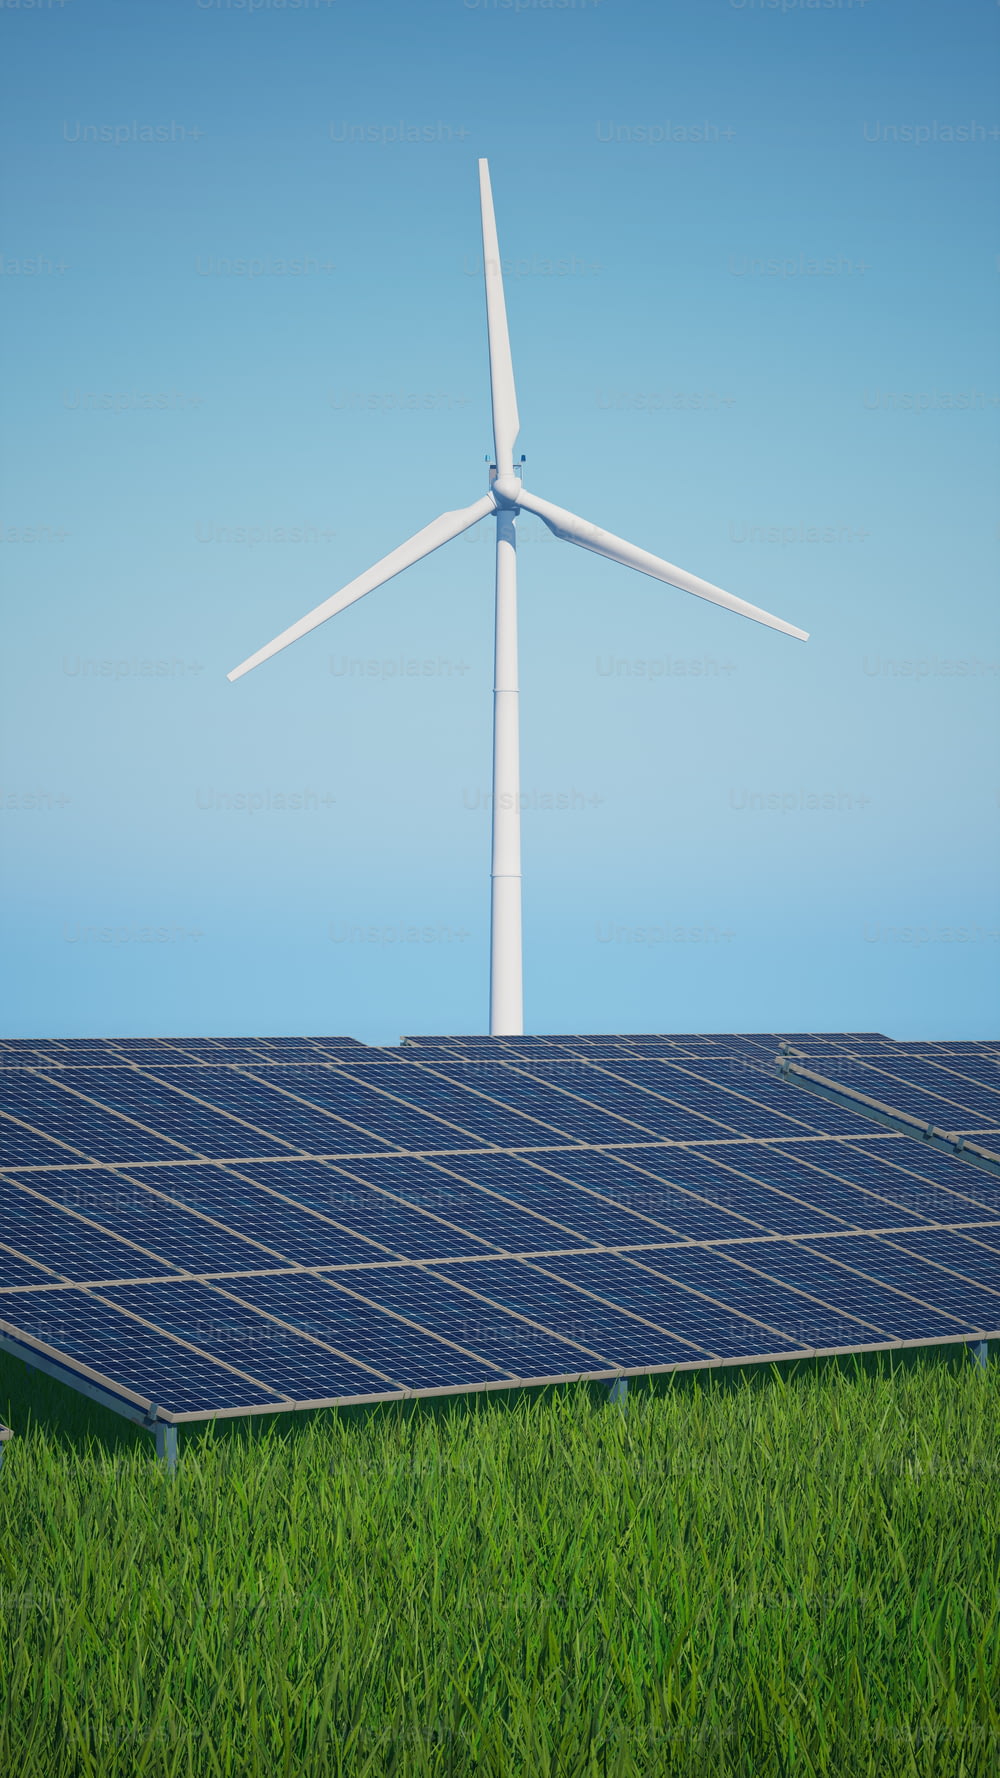 a solar panel and wind turbine on a sunny day